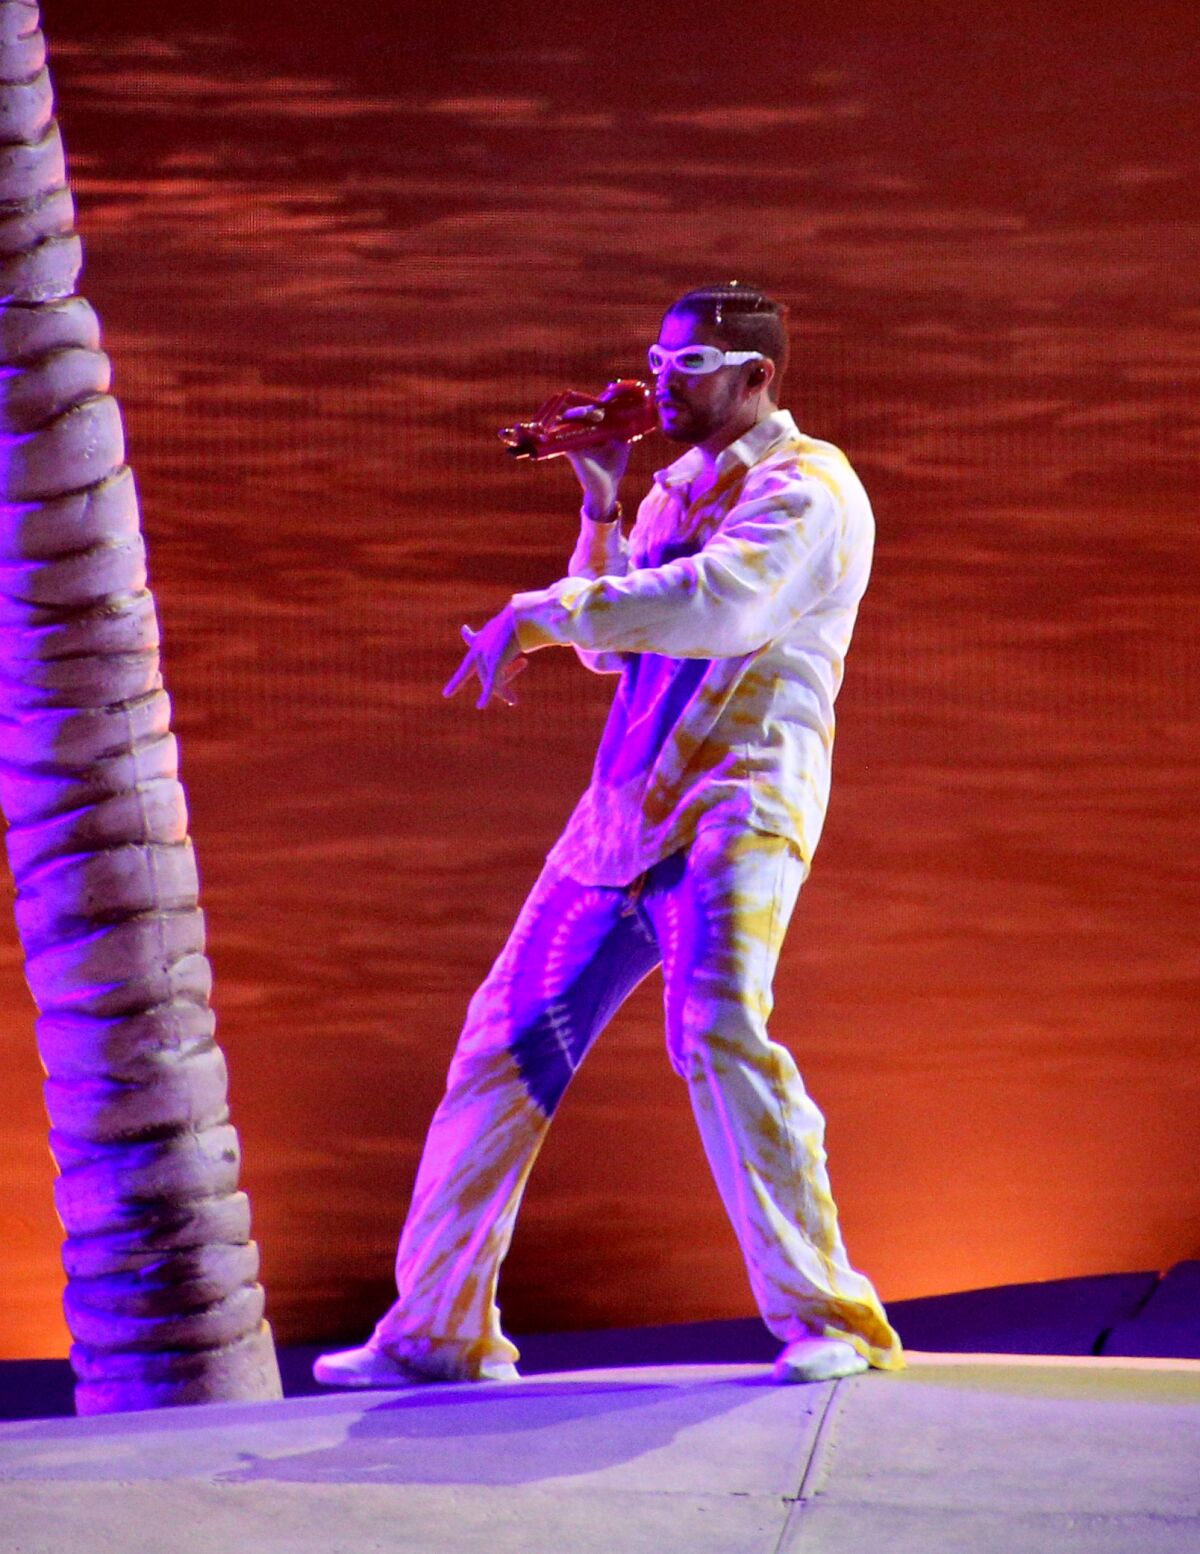 A Latin singer/rapper performs onstage